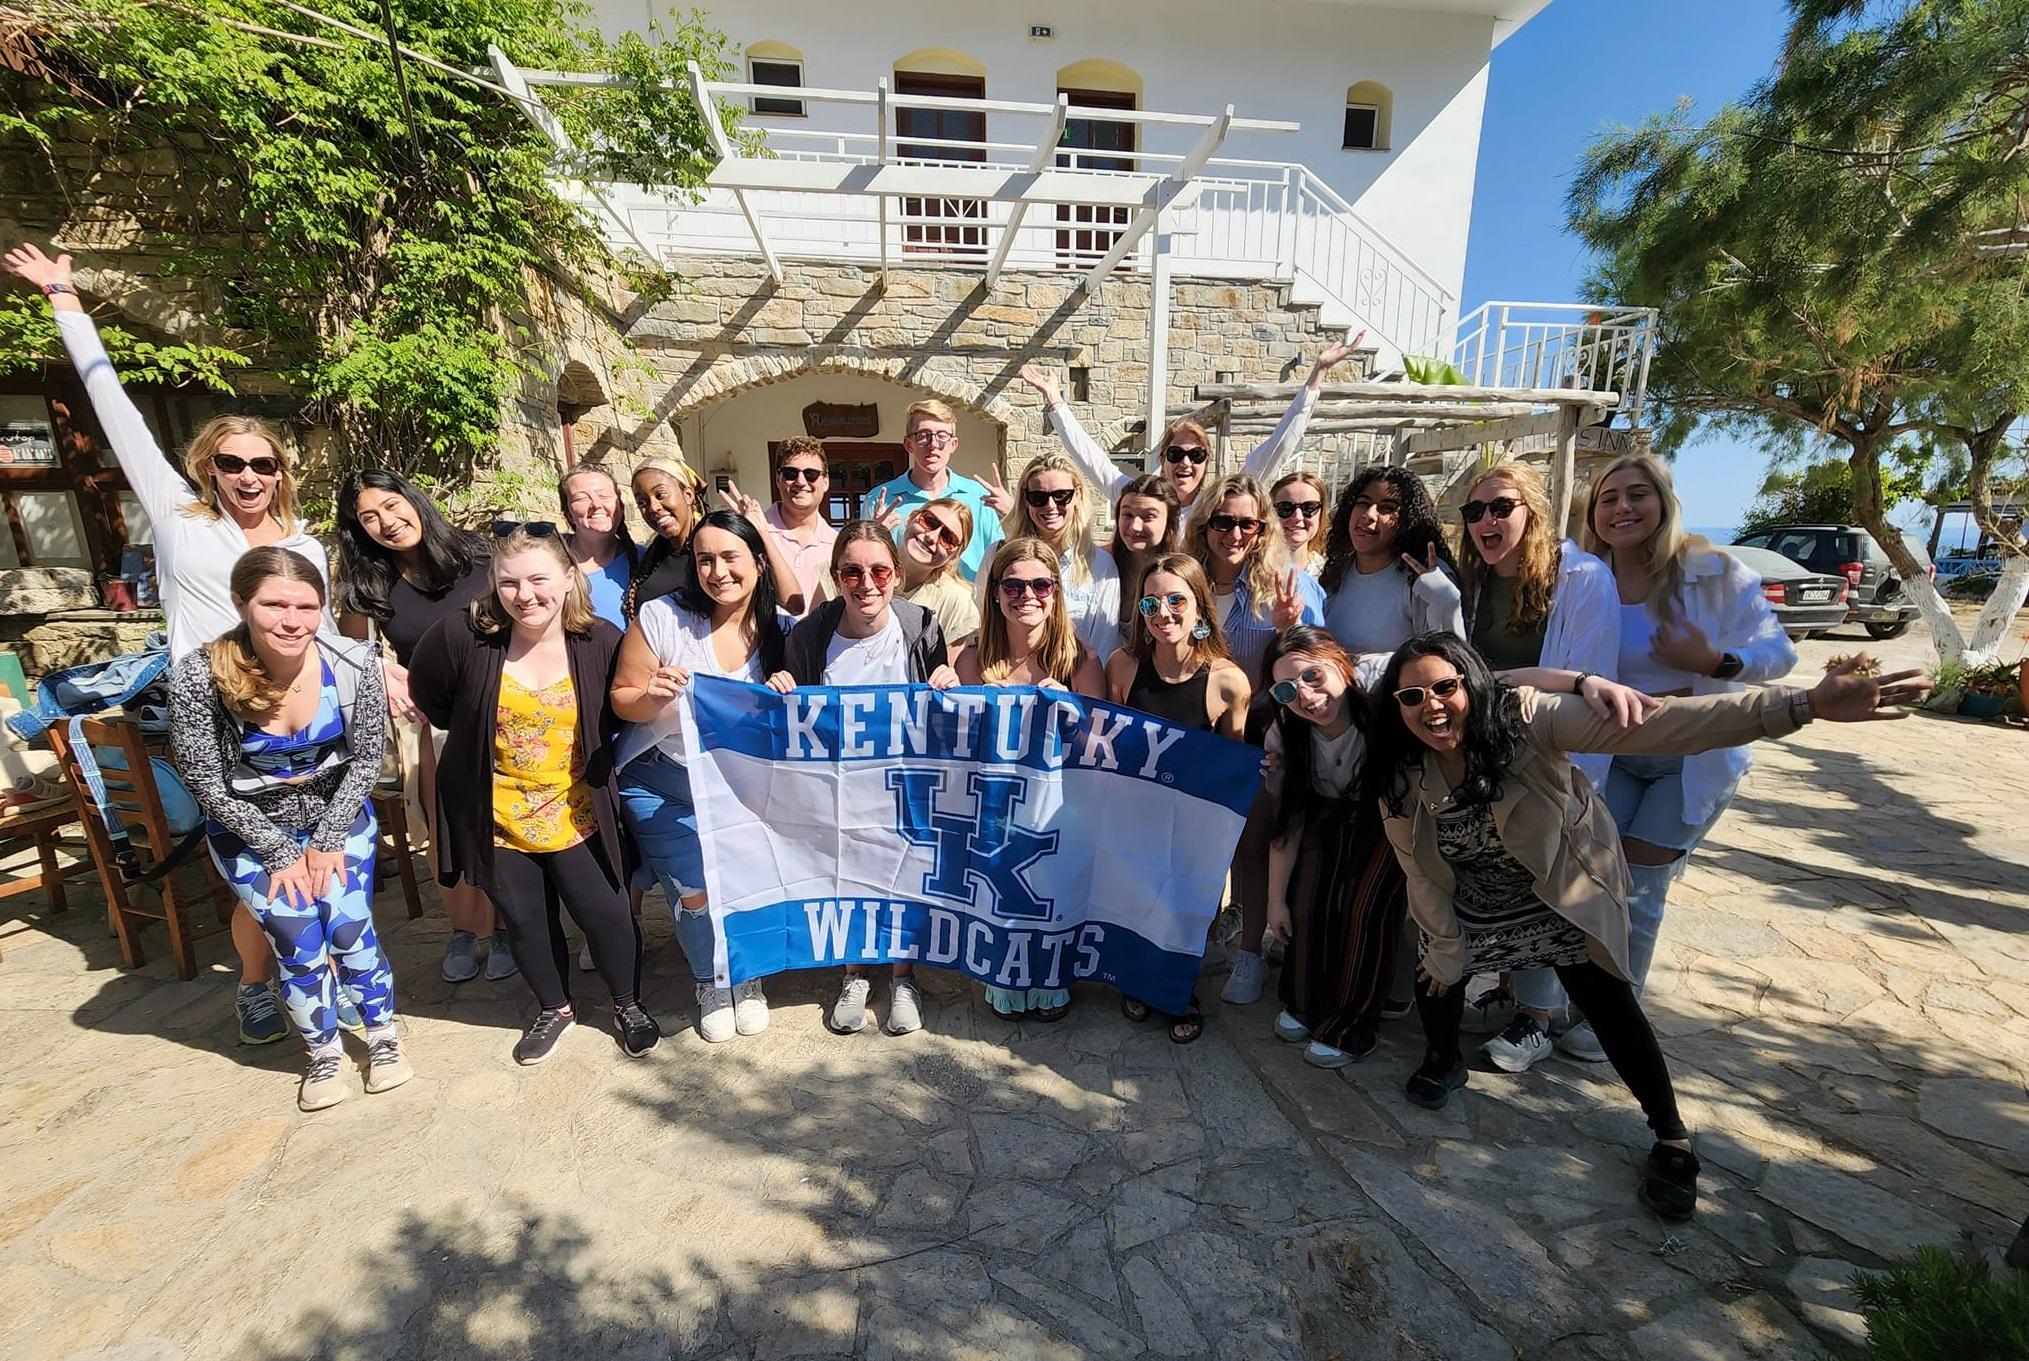 UK students learned about Blue Zone lifestyles in their recent trip to Greece.